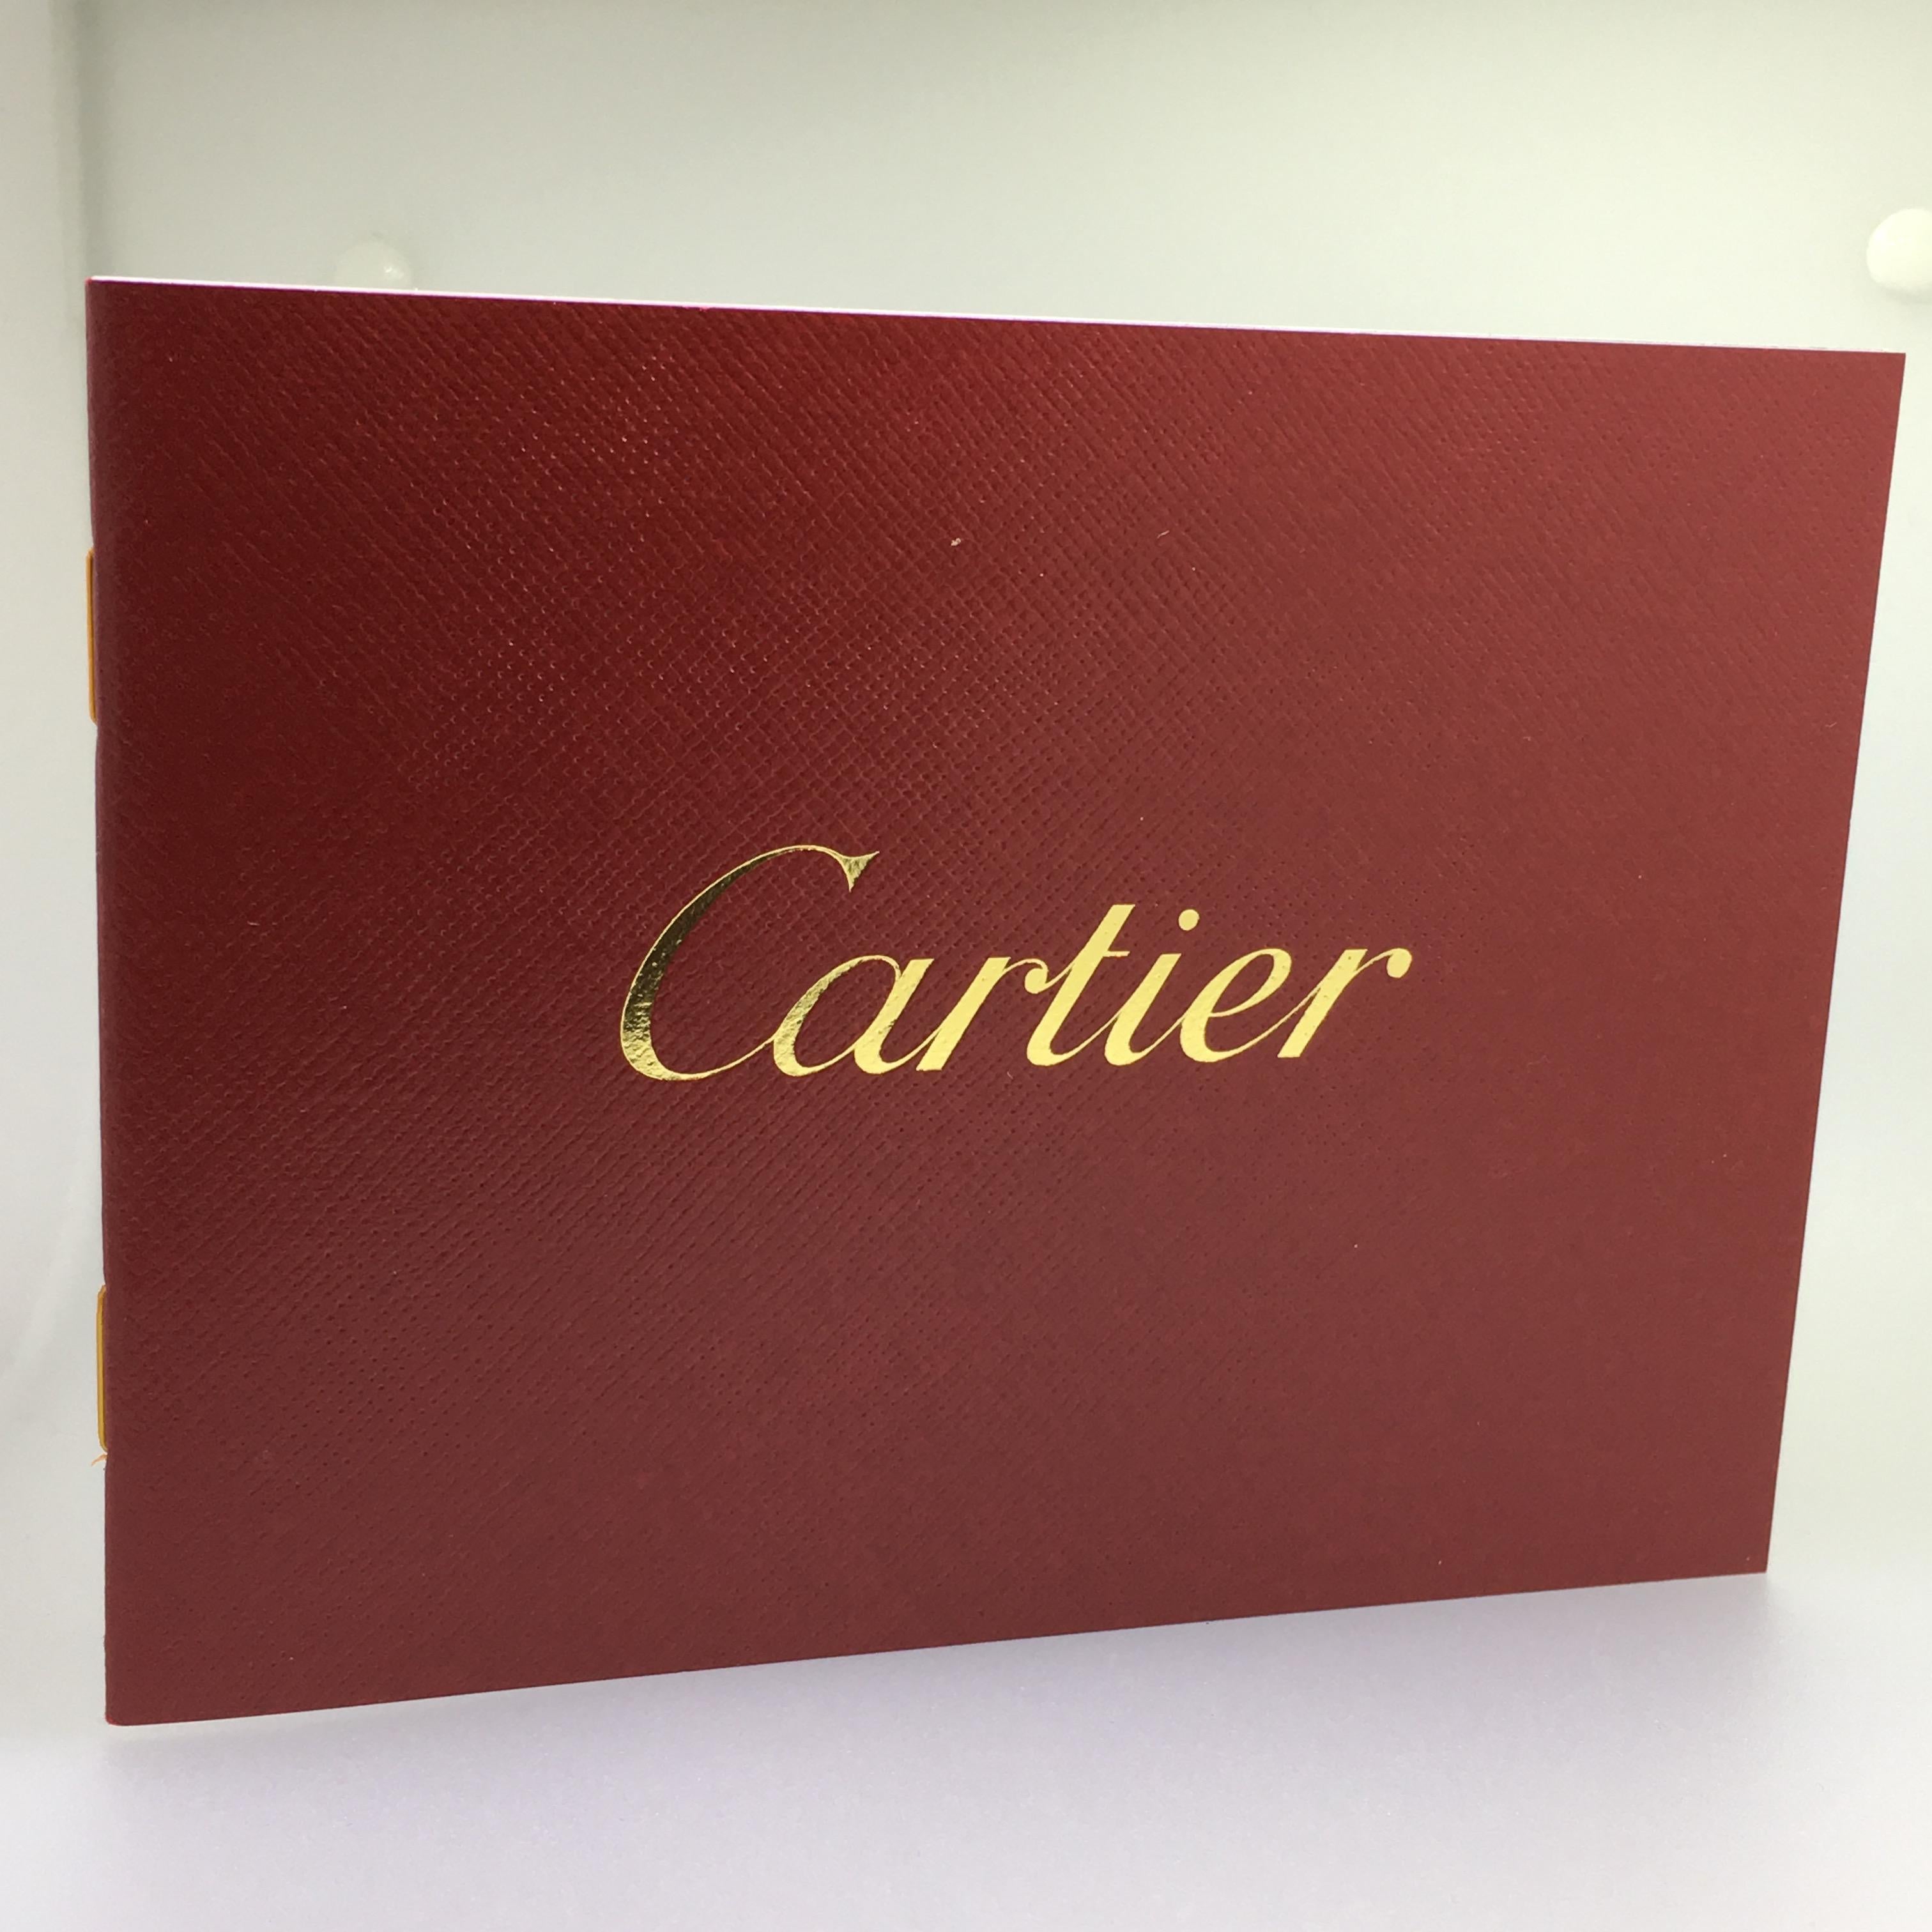 Cartier Panthère, Yellow Gold, Diamonds, Reference 1280-2, Mint Condition 8